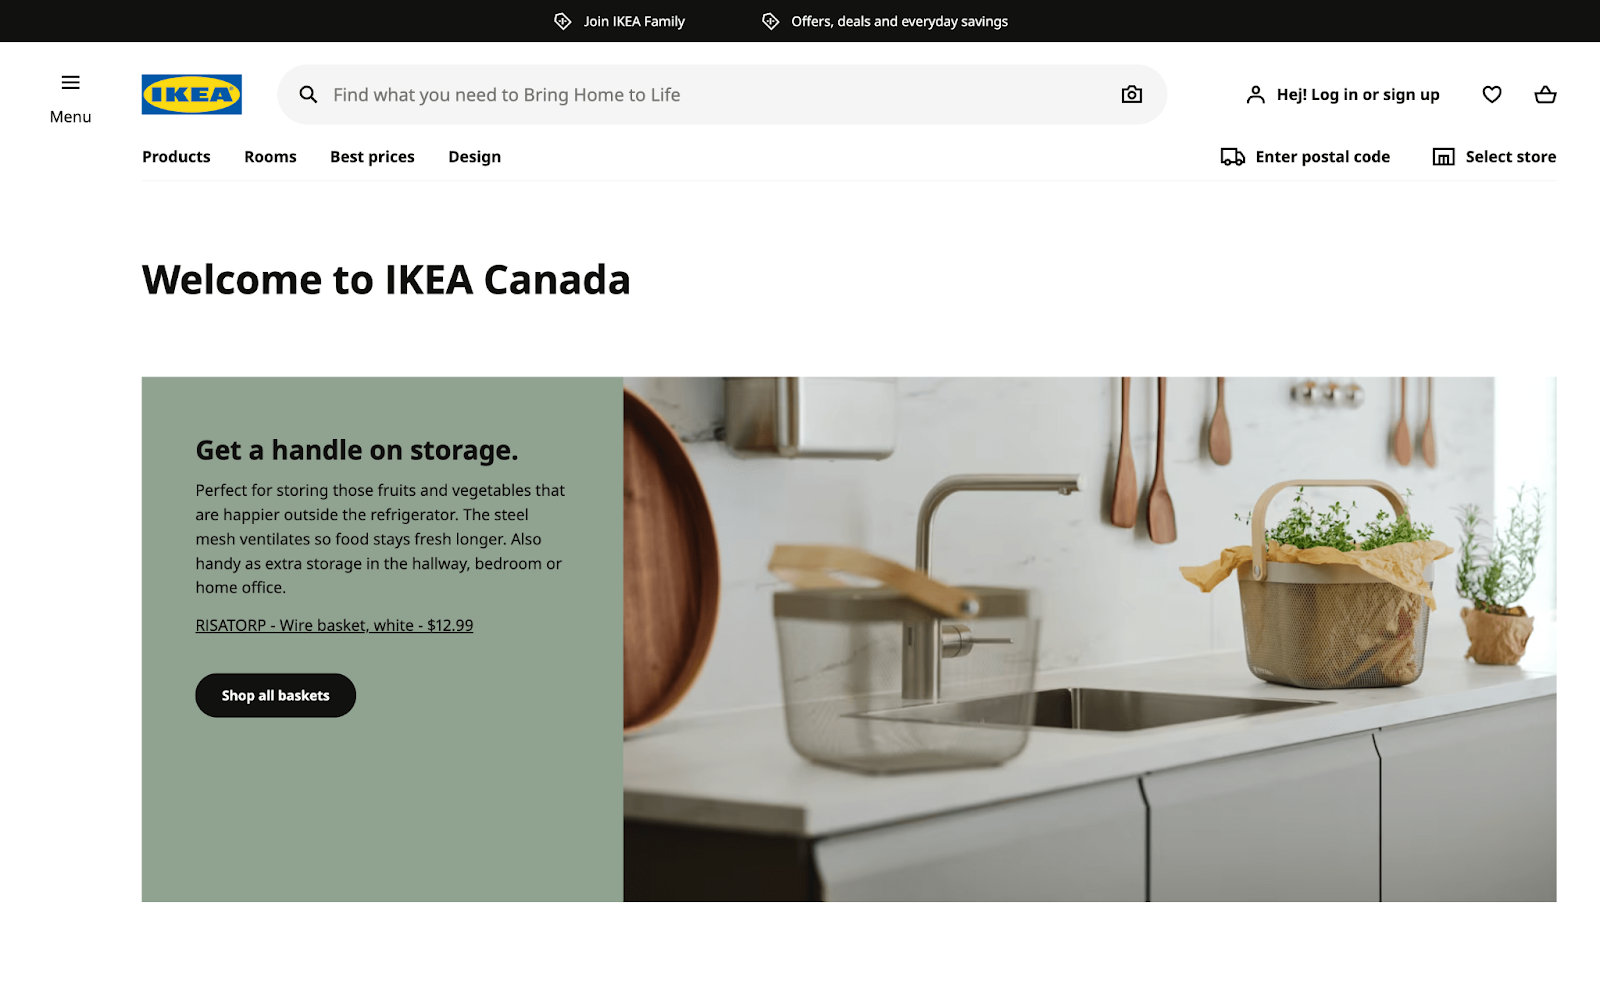 Top 10 Loyalty Programs 2022–A screenshot from IKEA Canada’s homepage. The title reads, “Welcome to IKEA Canada”. There is an image of a modern kitchen with storage baskets on the counter. The text beside the product image reads, “Get a handle on storage. Perfect for storing those fruits and vegetables that are happier outside the refrigerator. The steel mesh ventilates so food stays fresh longer. Also handy as extra storage in the hallway, bedroom or home office. RISATORP - Wire basket, white - $12.99”. There is a black button with white text that says, “Shop all baskets”. 